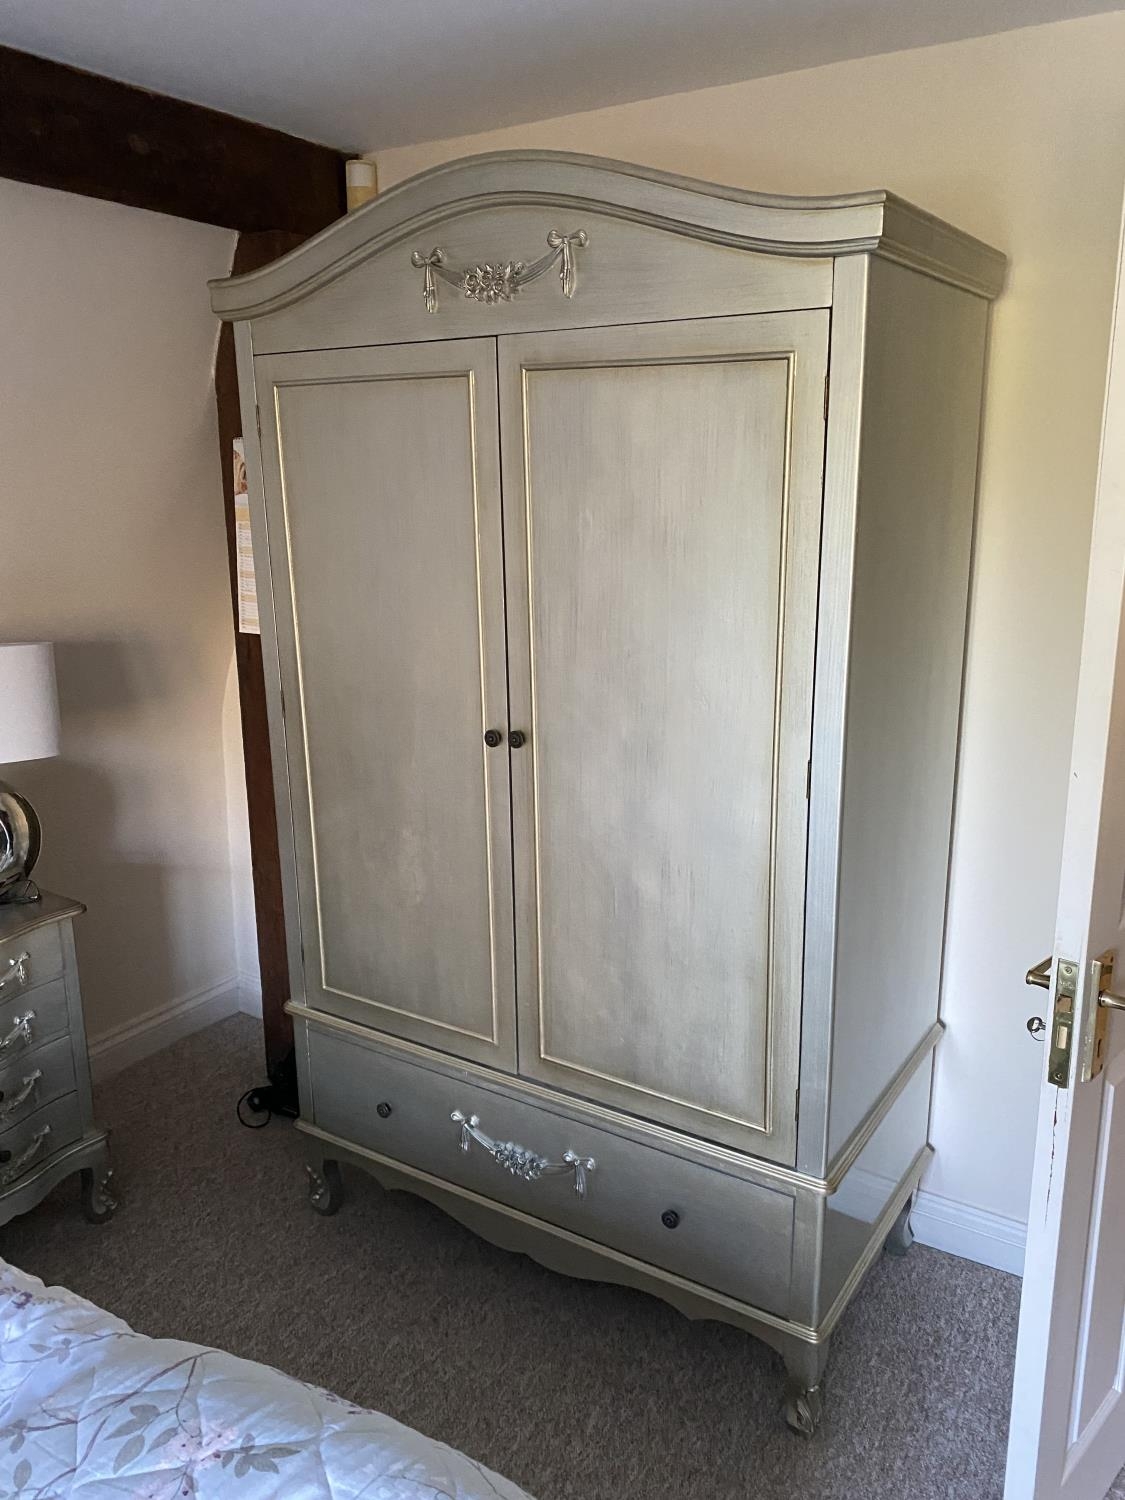 Matching bedroom suite comprising of : Decorative Two door wardrobe, on raised legs with floral